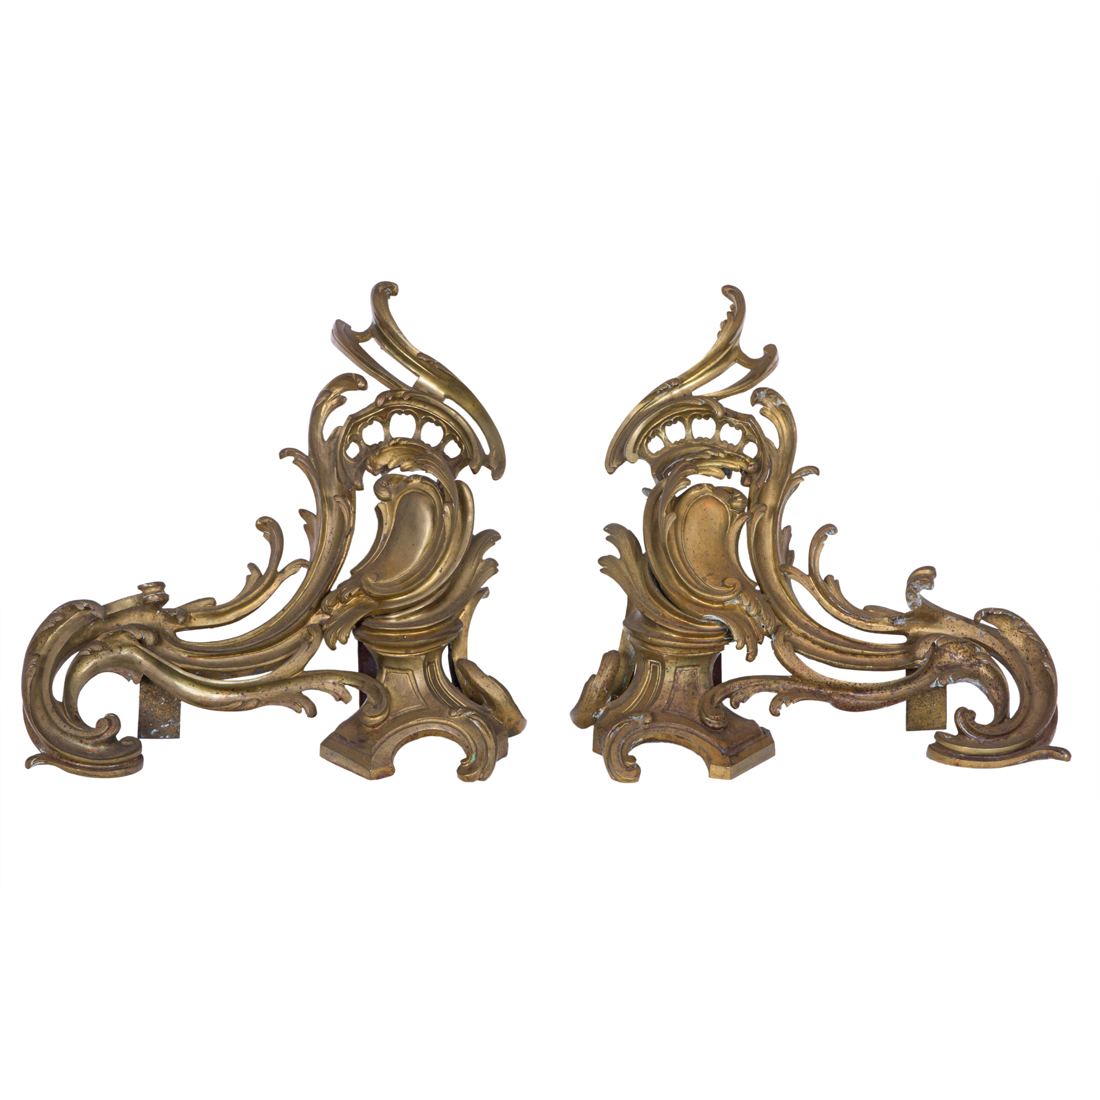 PAIR OF LOUIS XV STYLE BRONZE CHENETS 3a1acb